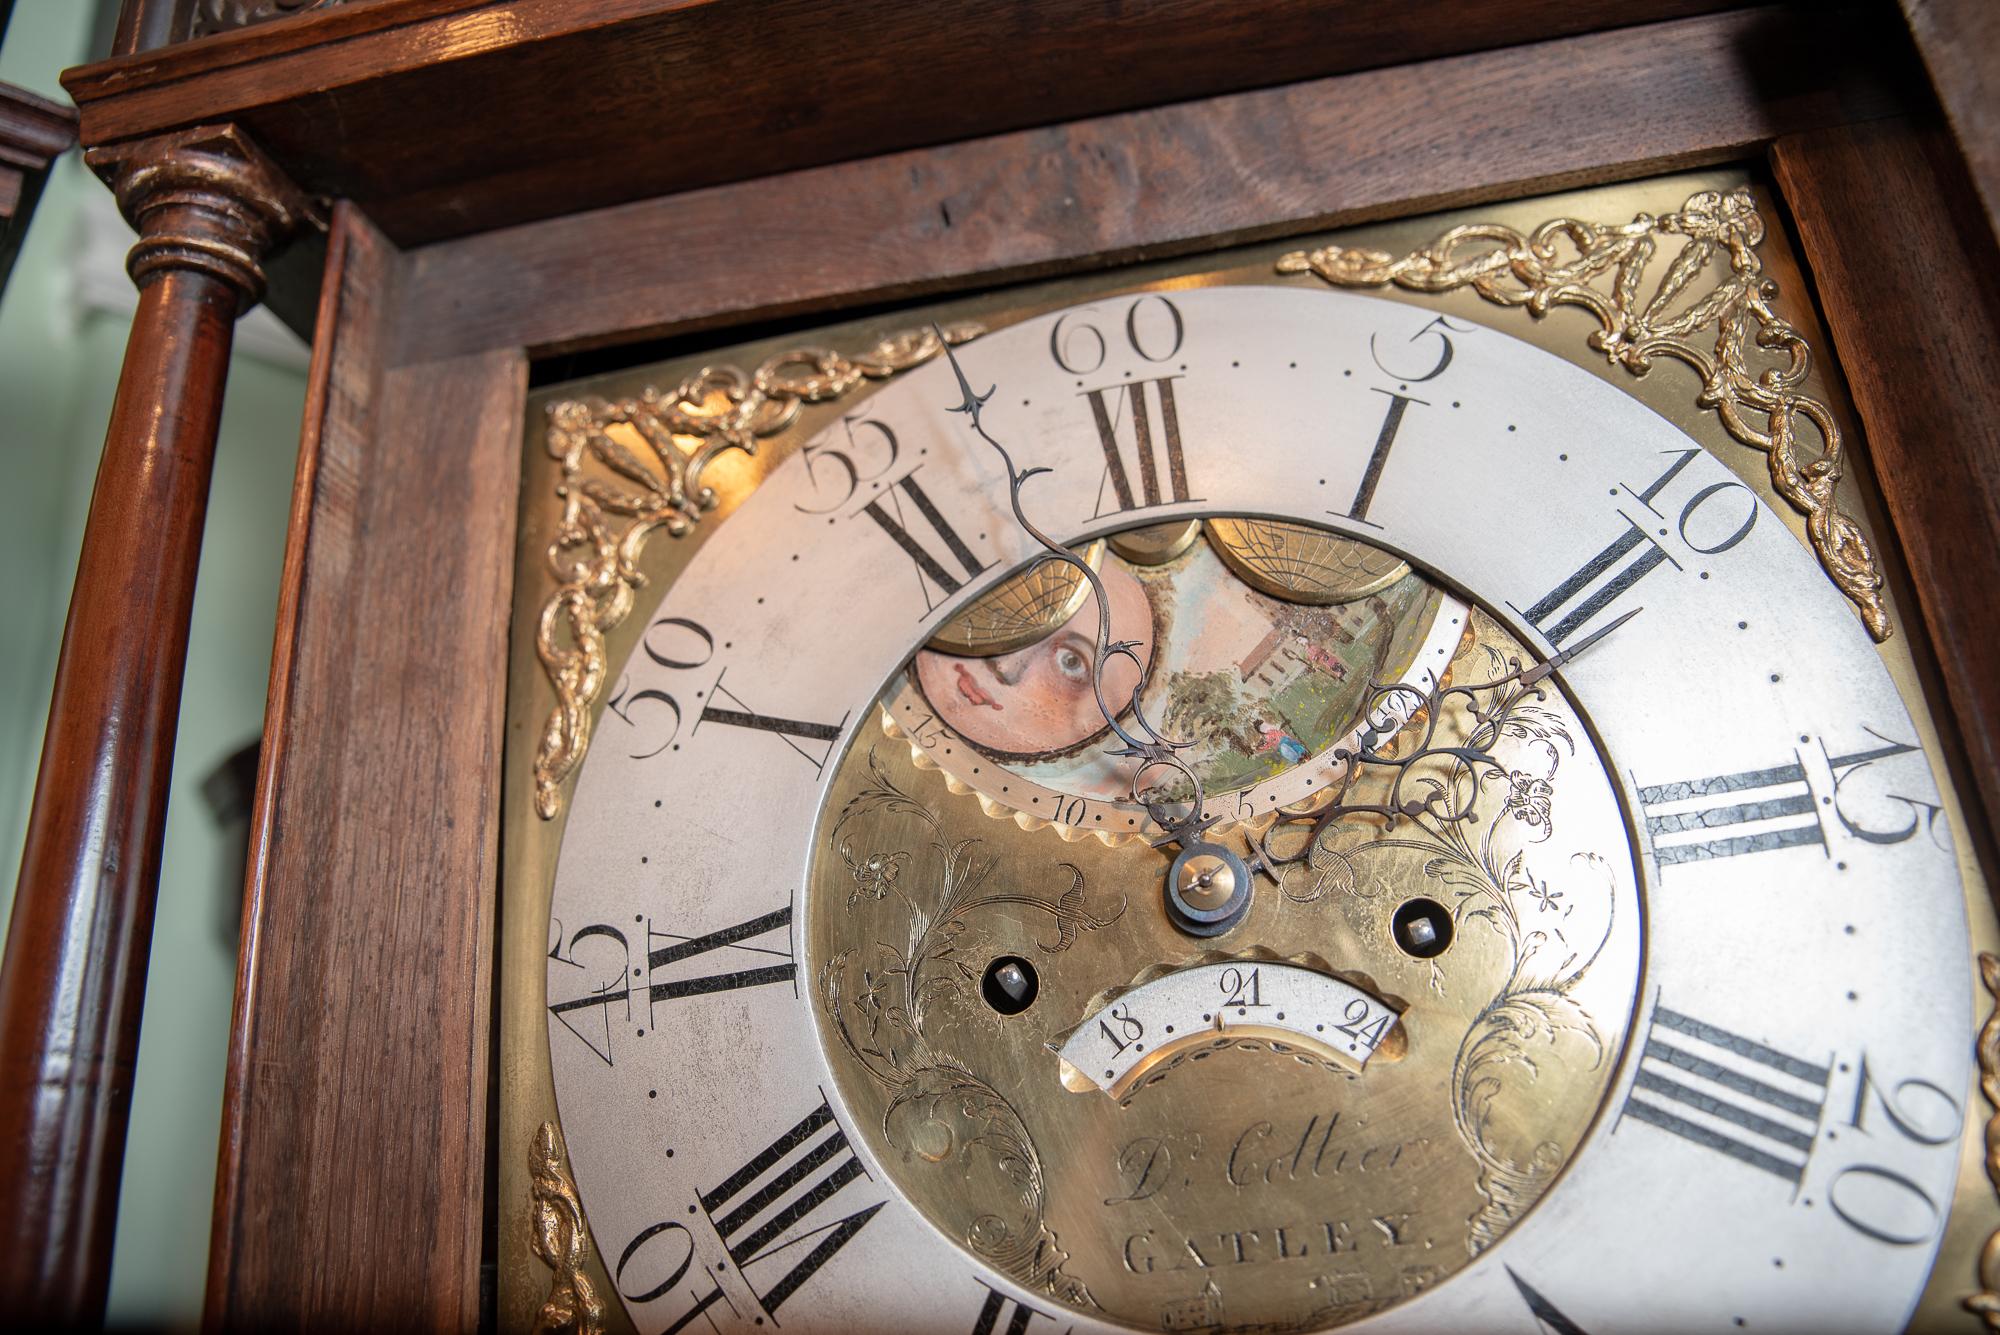 A very fine 8 day square brass dial moon phase clock, by David Collier of Gatley Green, Manchester. Recorded working, circa 1750-1762.
In a well proportioned high quality quarter sawn oak case, with medullary rays, mahogany banding, reeded corners